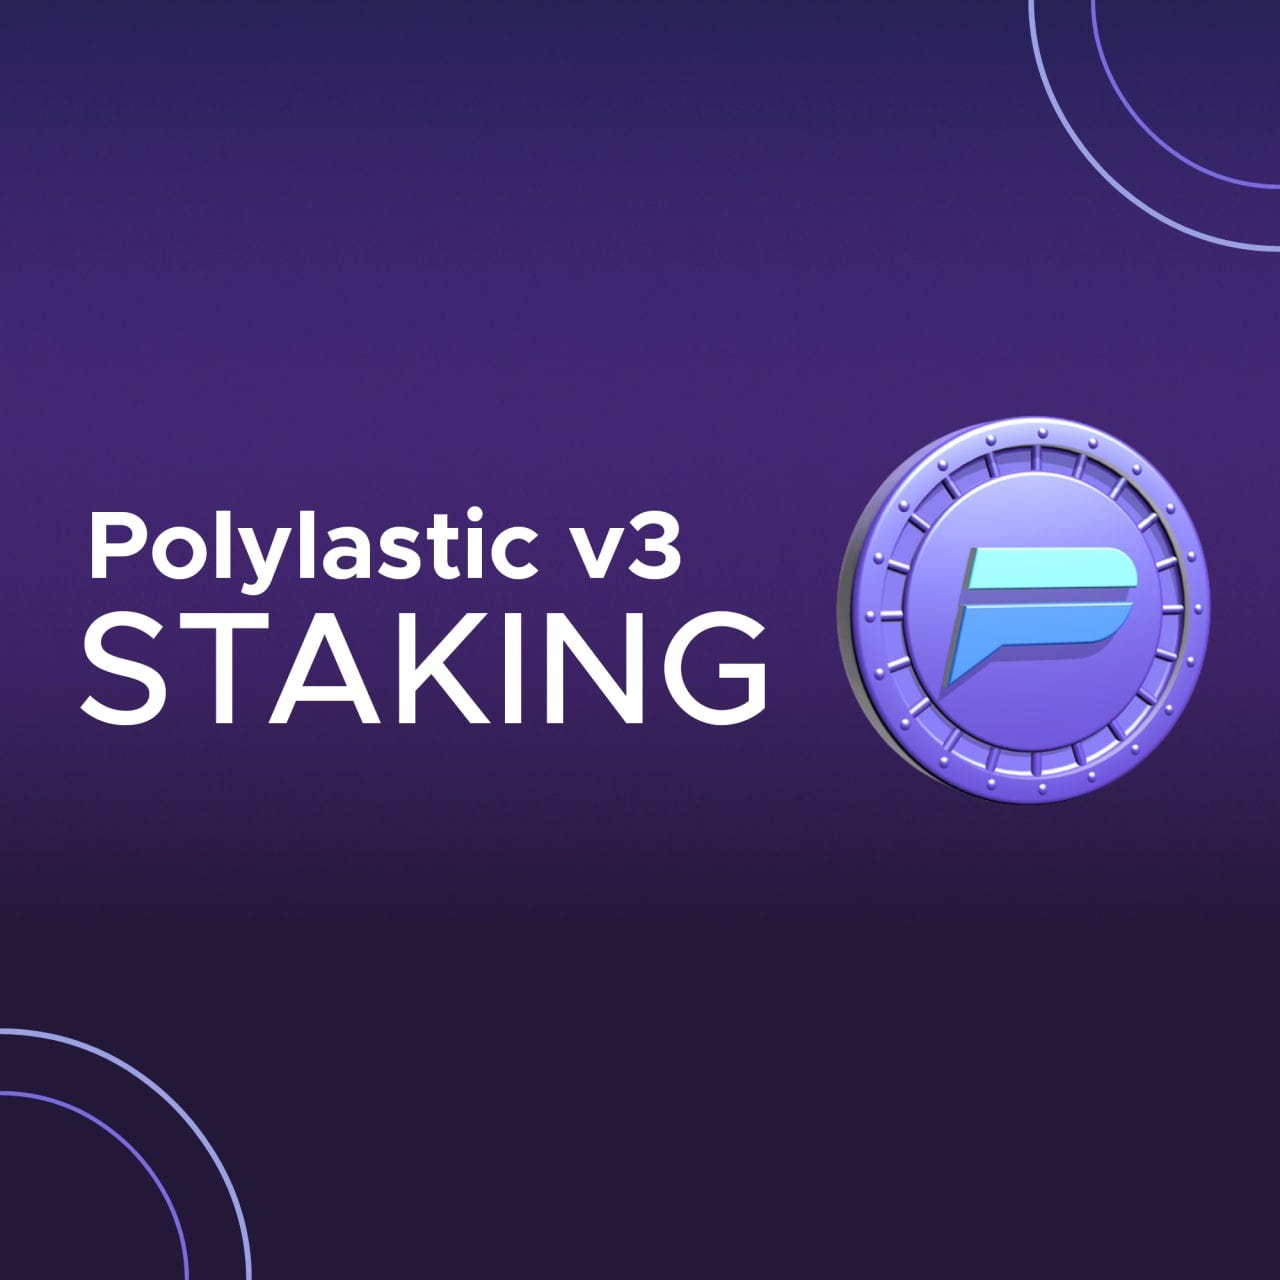 Polylastic Staking Portal Now Live!